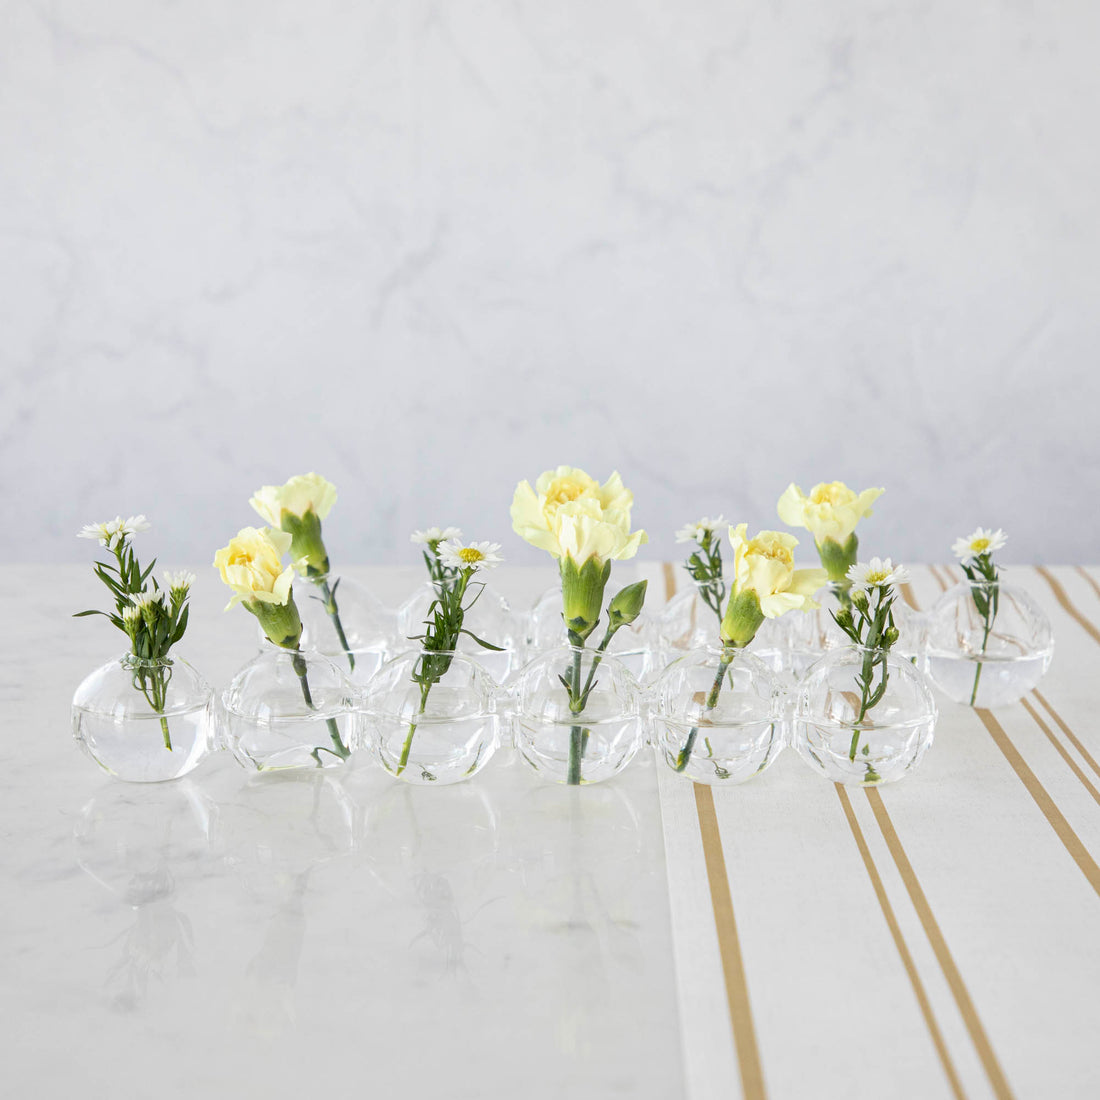 A row of small Chive Caterpillar Vases each containing a single yellow carnation, arranged on a striped surface against a marble background.